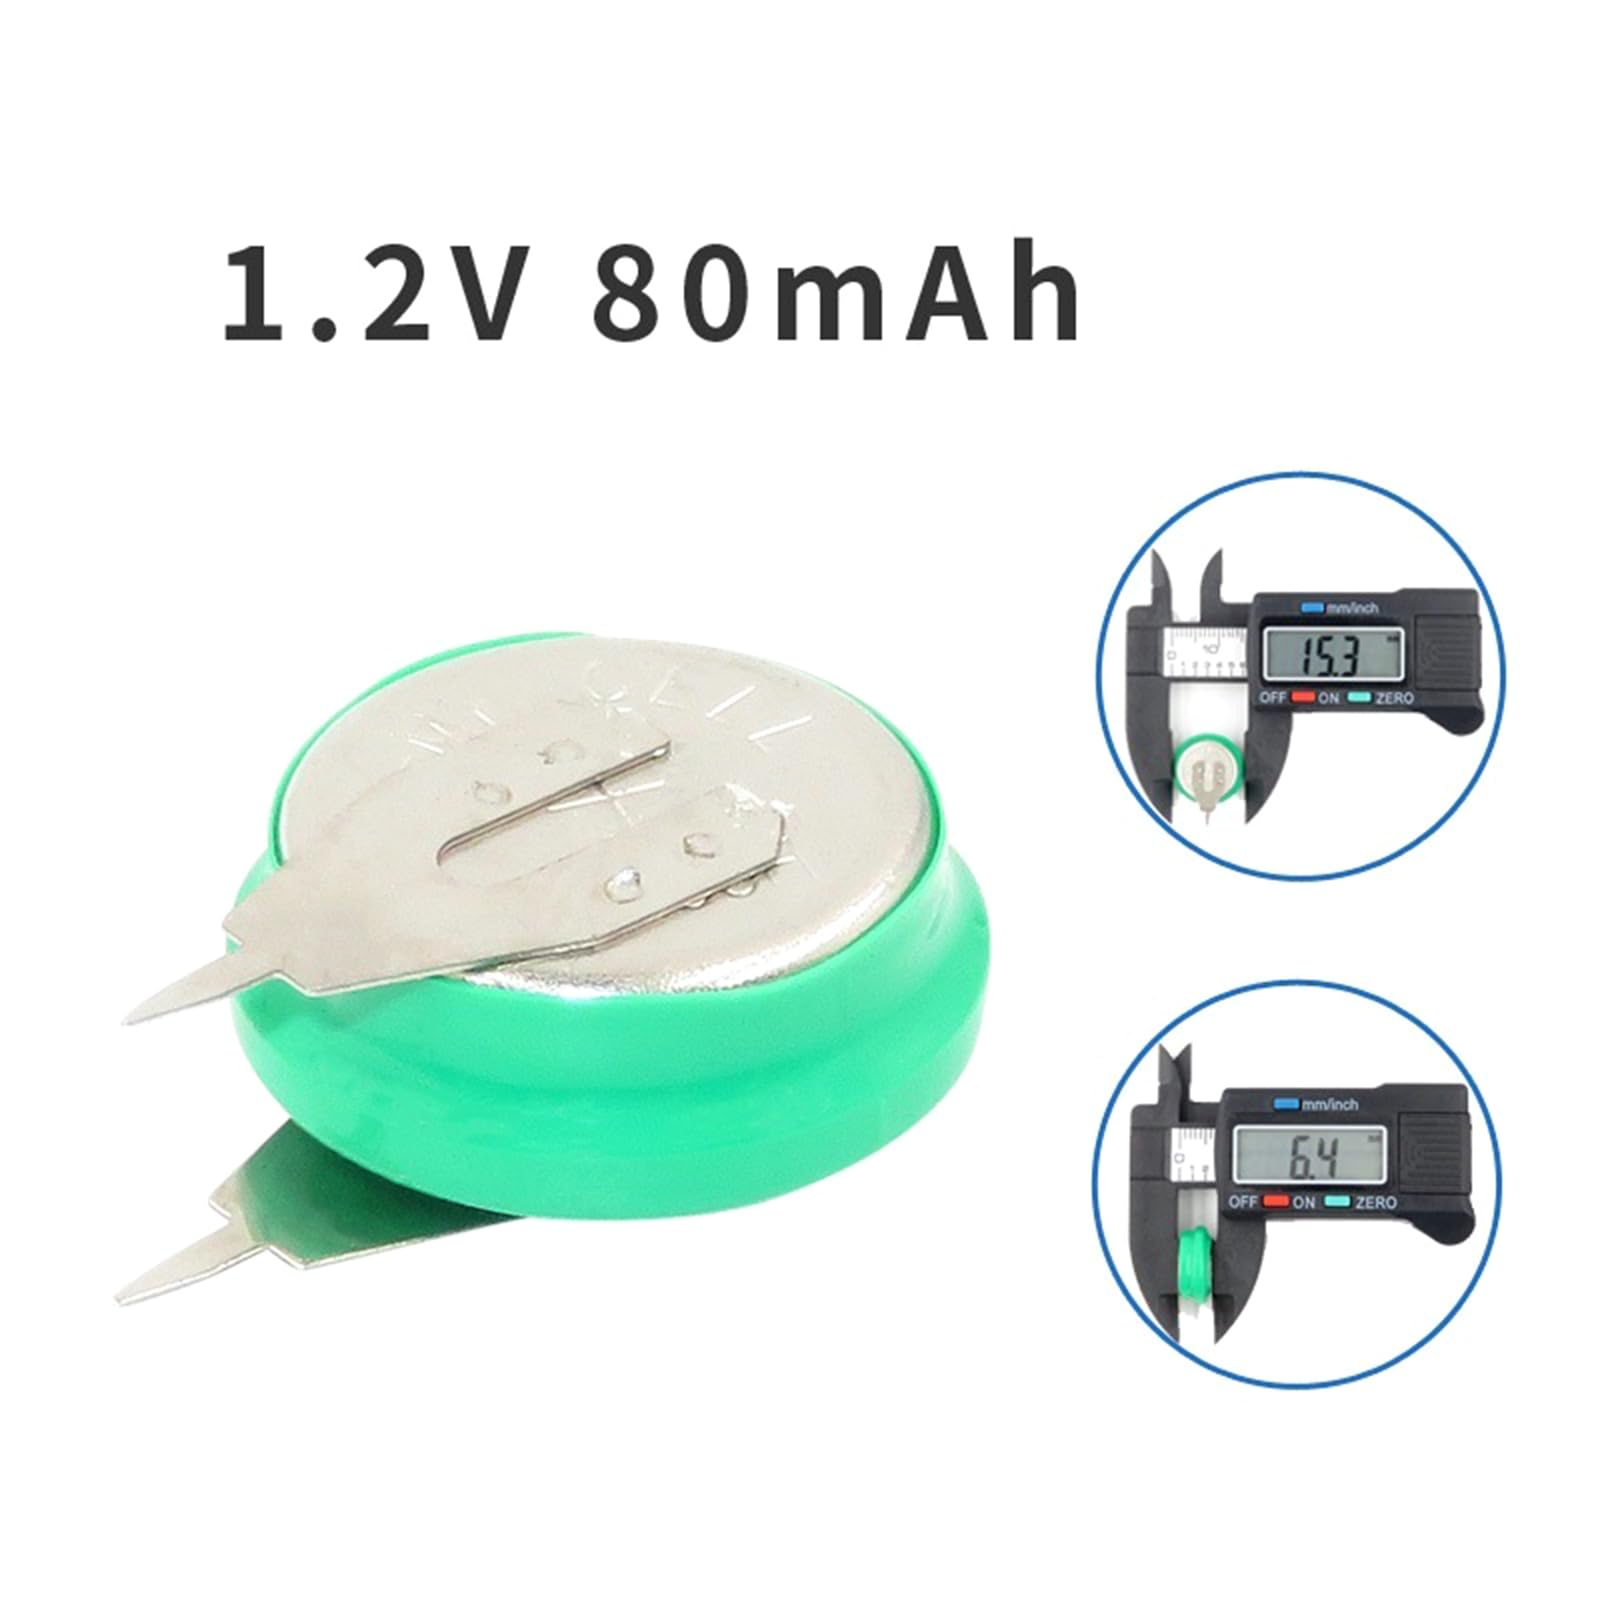 ljhnba Capacity NiMh Rechargeable Batteries Long Lasting 1.2V 80mAh Coin Cell Batteries with Solder Pins for Electric Toy Solder Pins Batteries Electronic Devices Battery Long Lasting Battery NiMh